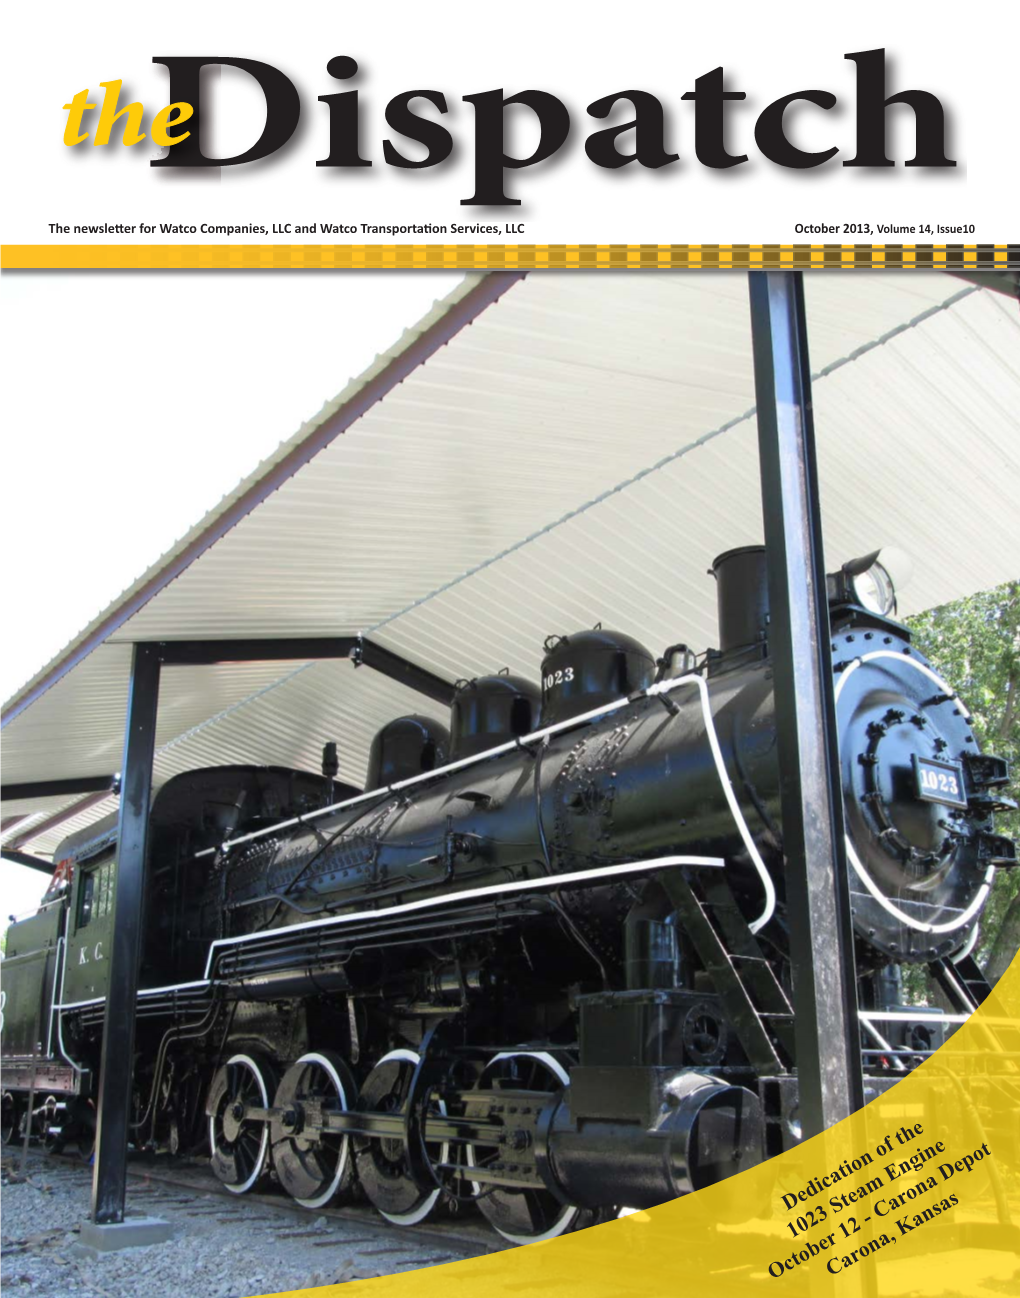 Dedication of the 1023 Steam Engine October 12